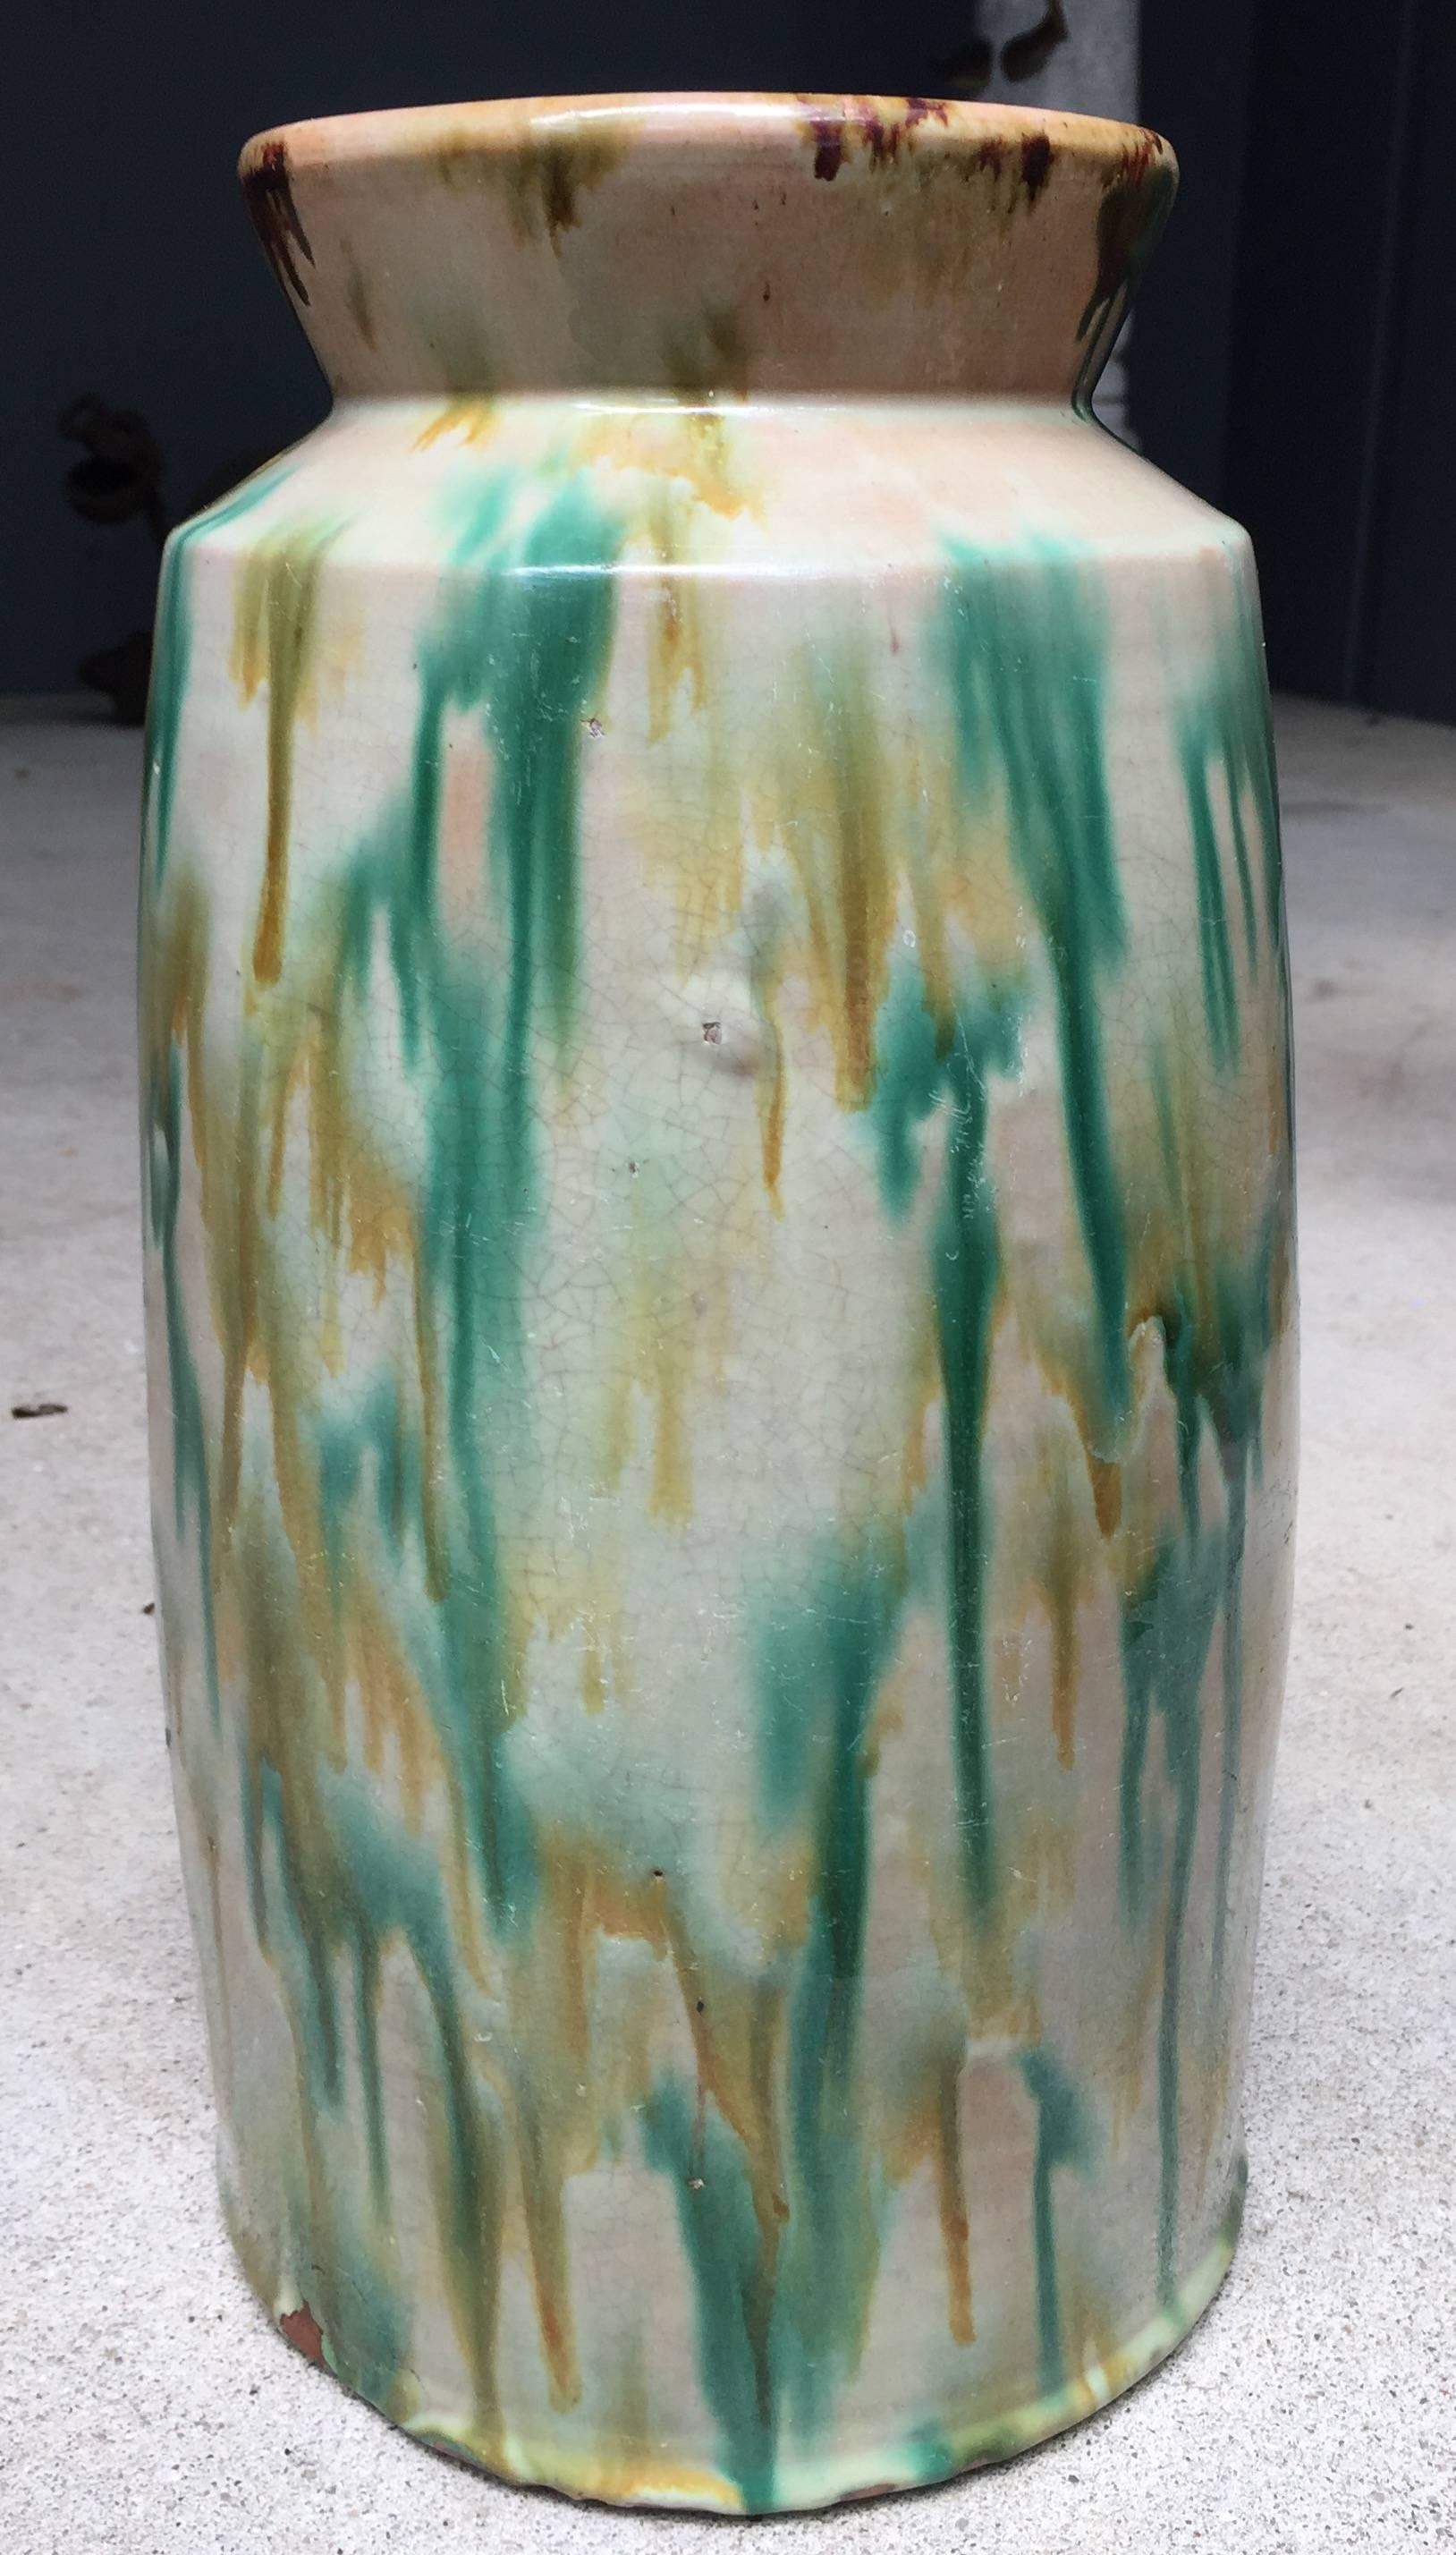 Shenandoah Valley, North Carolina, or New England in origin glazed jar with great green and brown dripped paint. In very good overall condition.